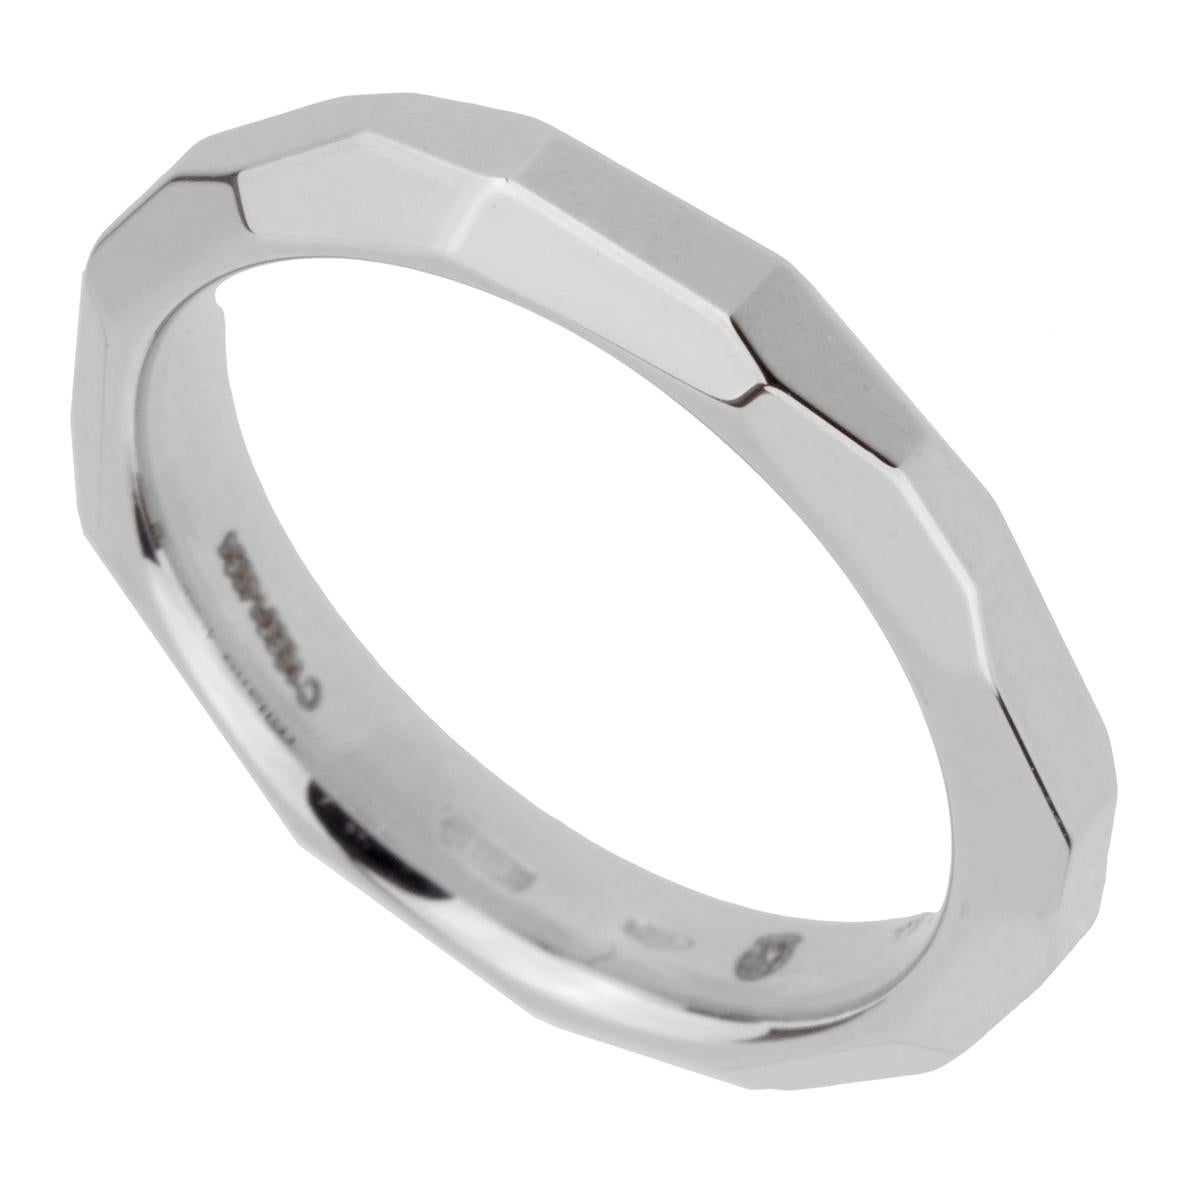 A chic white gold Pomellato band style ring crafted in 18k white gold, The ring measures a size 6.25 and can be resized.

Sku: 2384